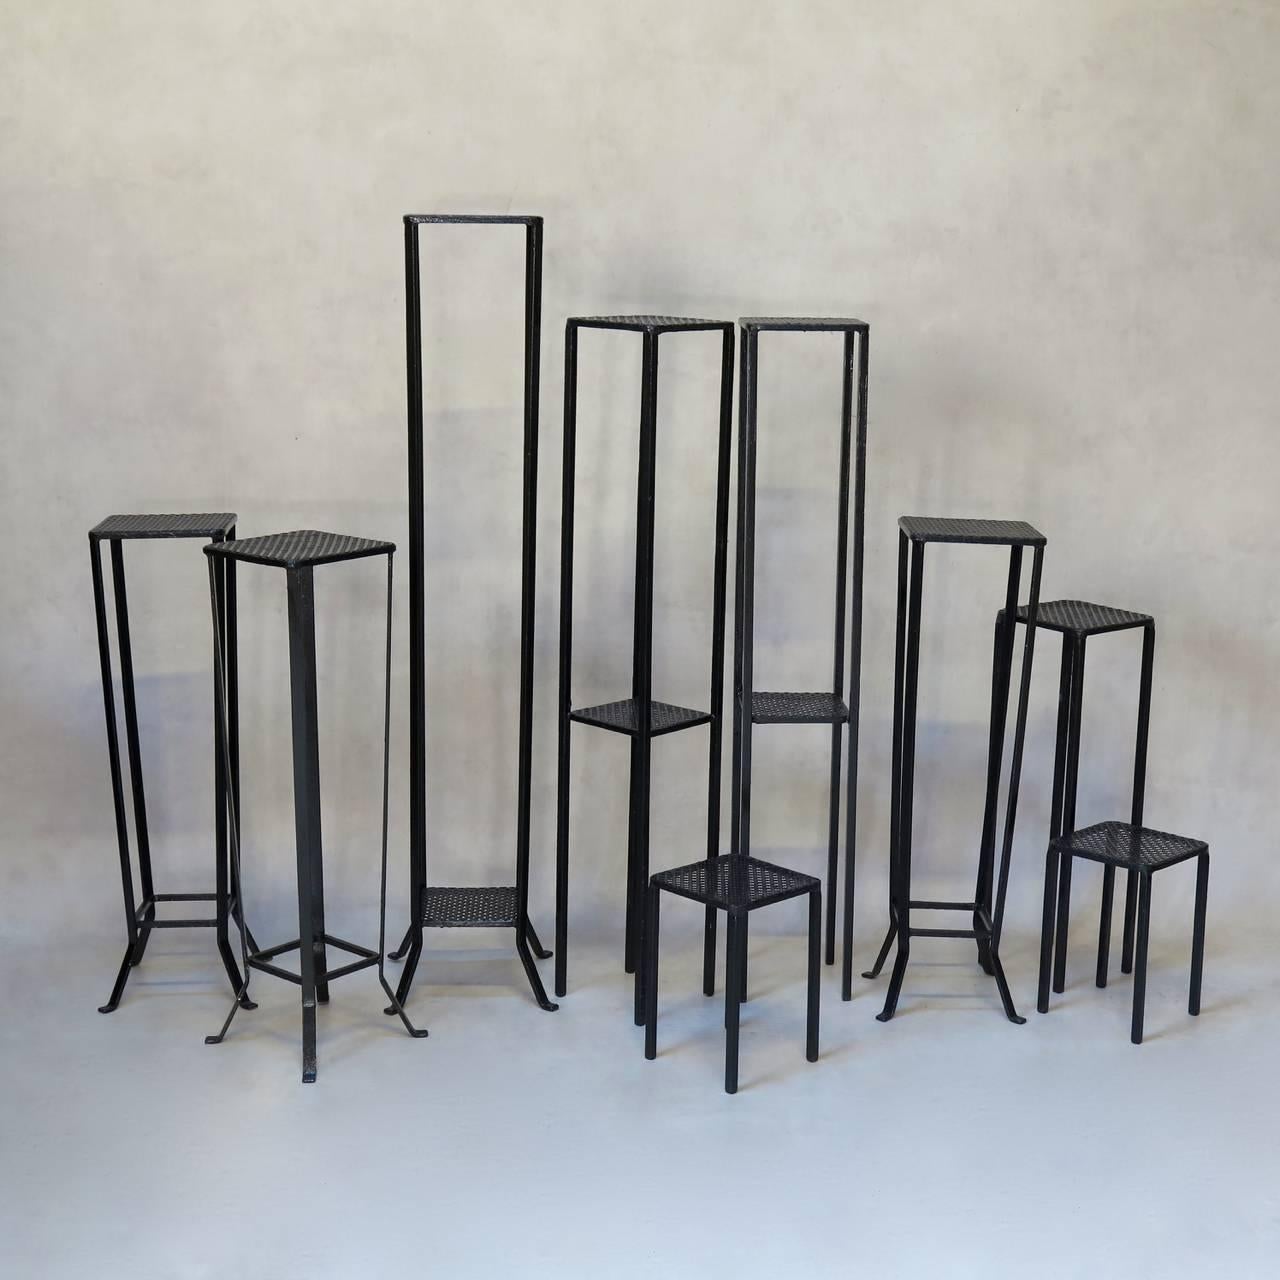 Set of nine plant stands of various shapes and sizes, painted black, with cloverleaf-patterned sheet metal tops. From a florists.

Dimensions provided below are for the tallest. For comparison, the smallest pair measures (in